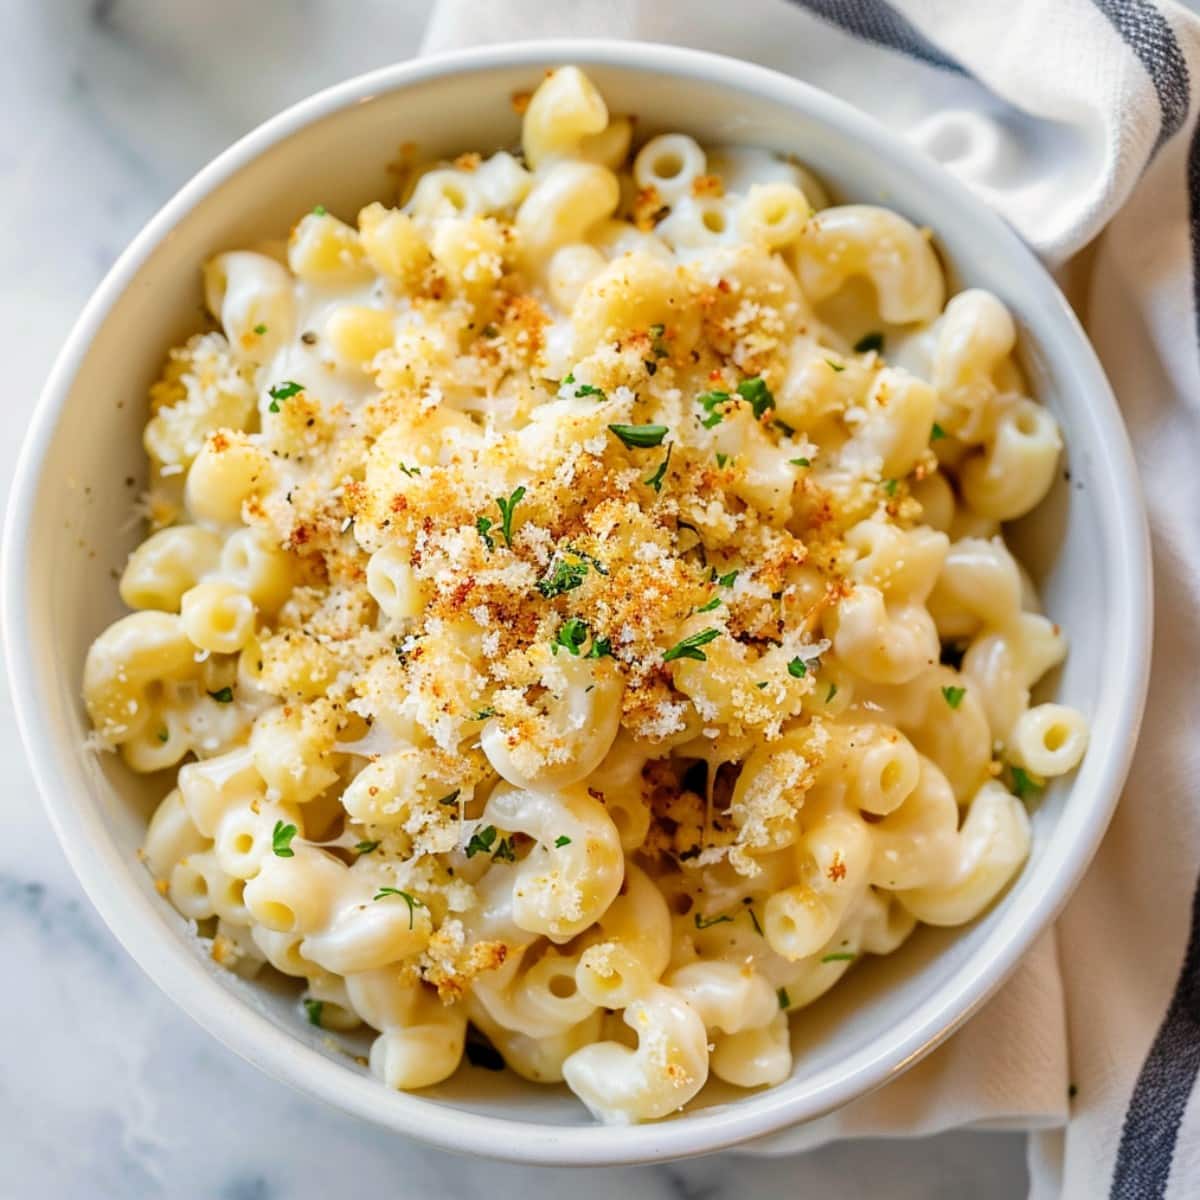 Indulgent white cheddar mac and cheese topped with panko crumbs